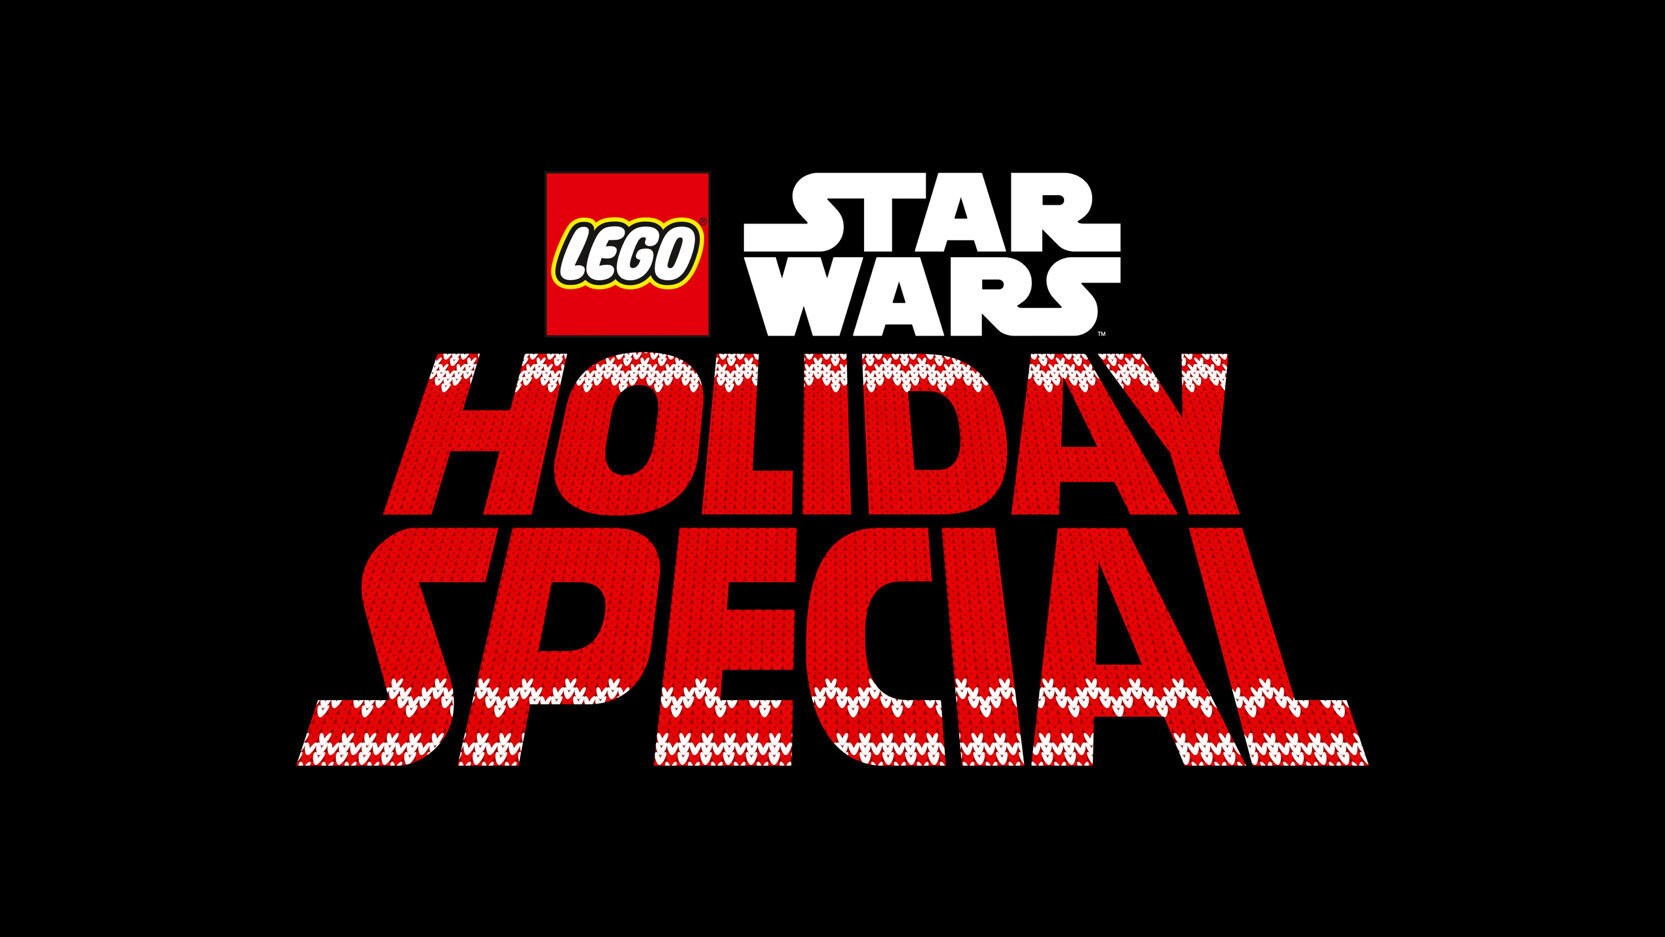 Disney+ to Premiere “The LEGO Star Wars Holiday Special” on Fan-Favorite Holiday Life Day, November 17